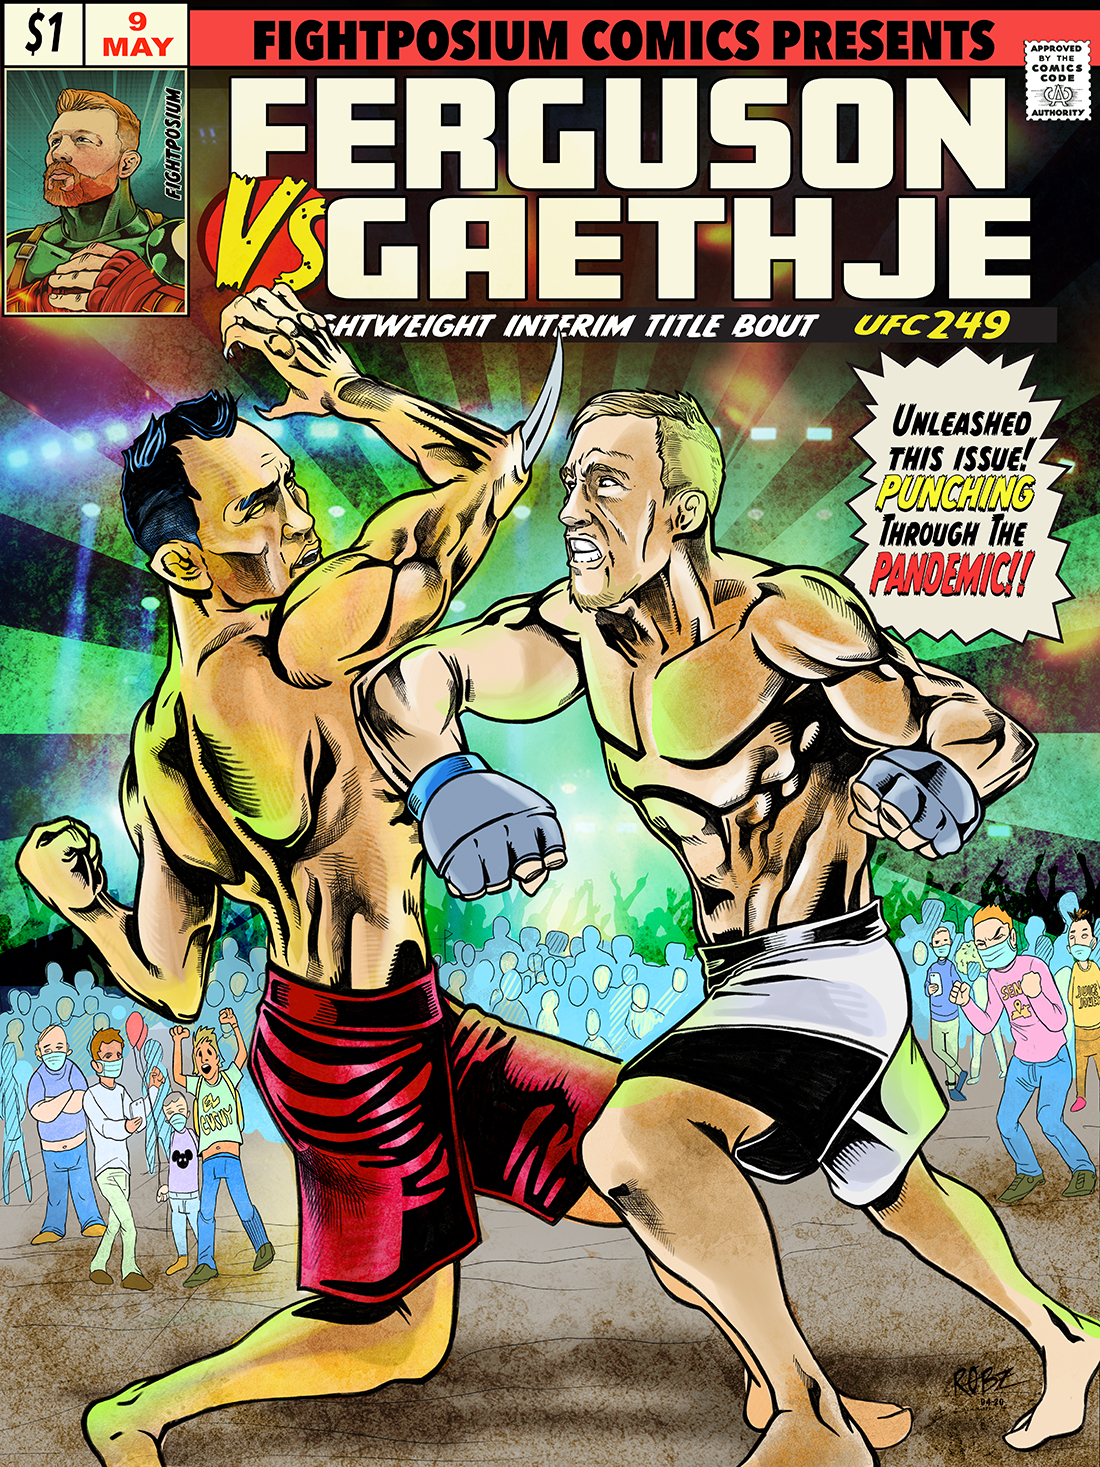 Read more about the article Ferguson VS Gaethje – Punching Through The Pandemic!